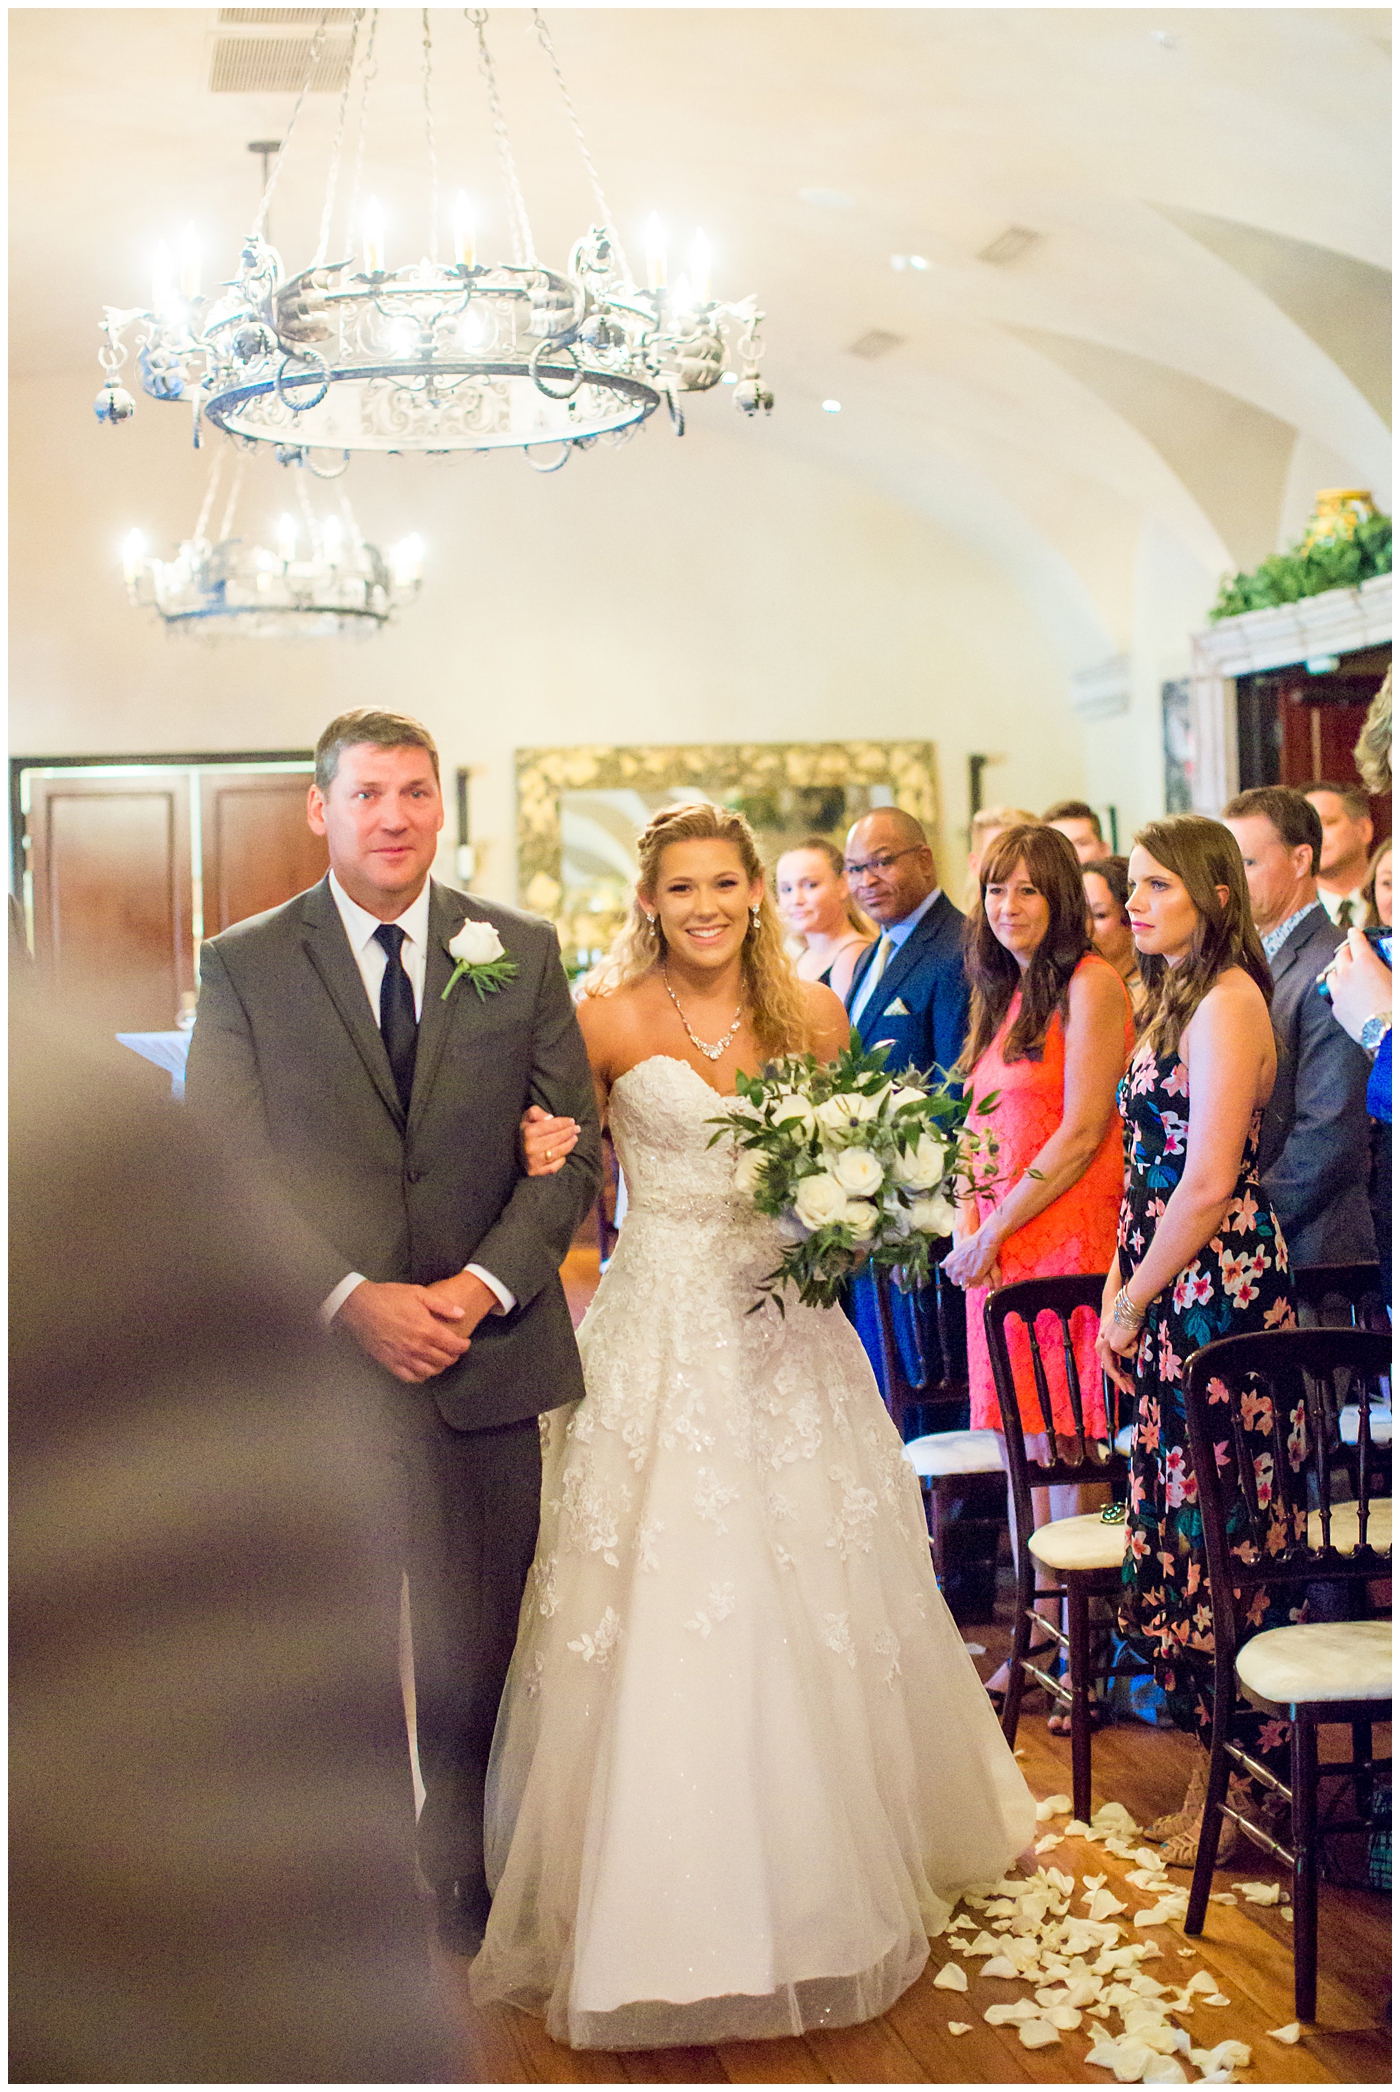 bride in strapless lace dress with white flower bouquet with roses and hydrangeas walking down aisle in inside ceremony with father on wedding day